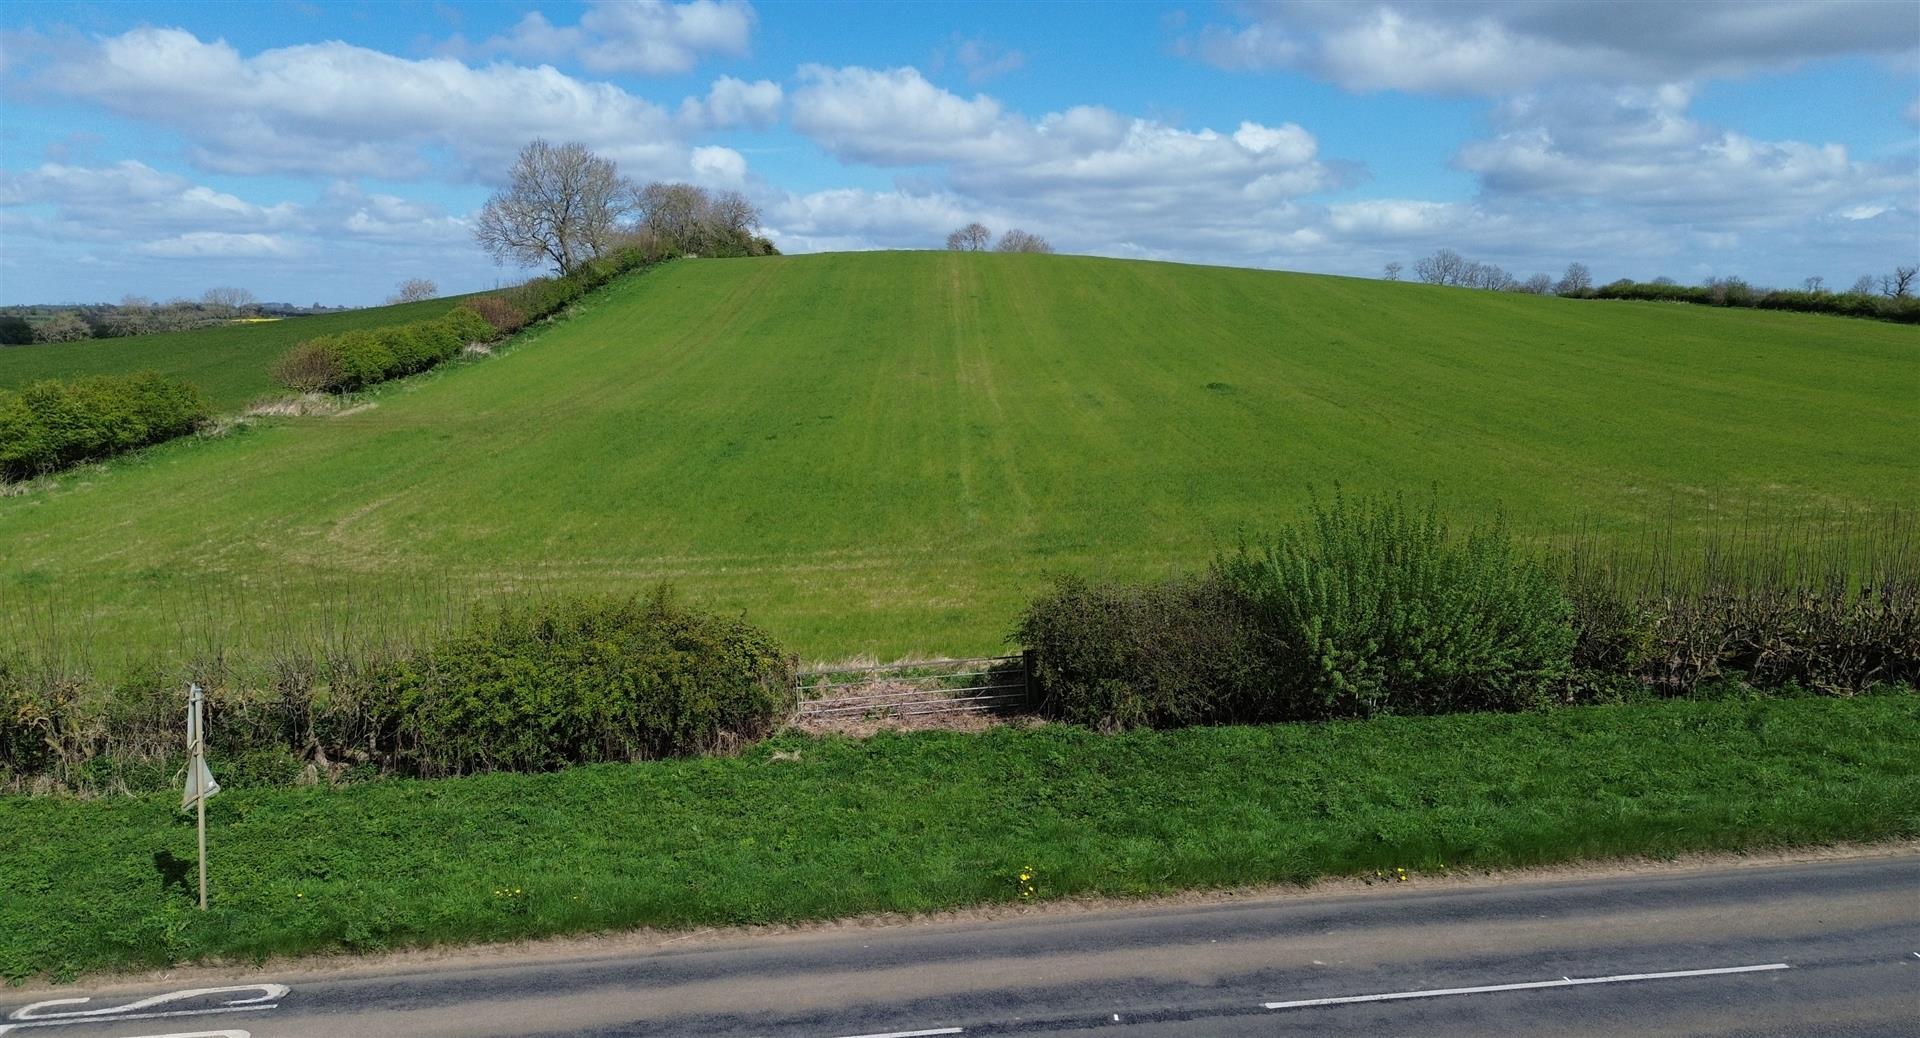 10.86 Acres of Arable Land at Nether Worton Road, Barford St Michael